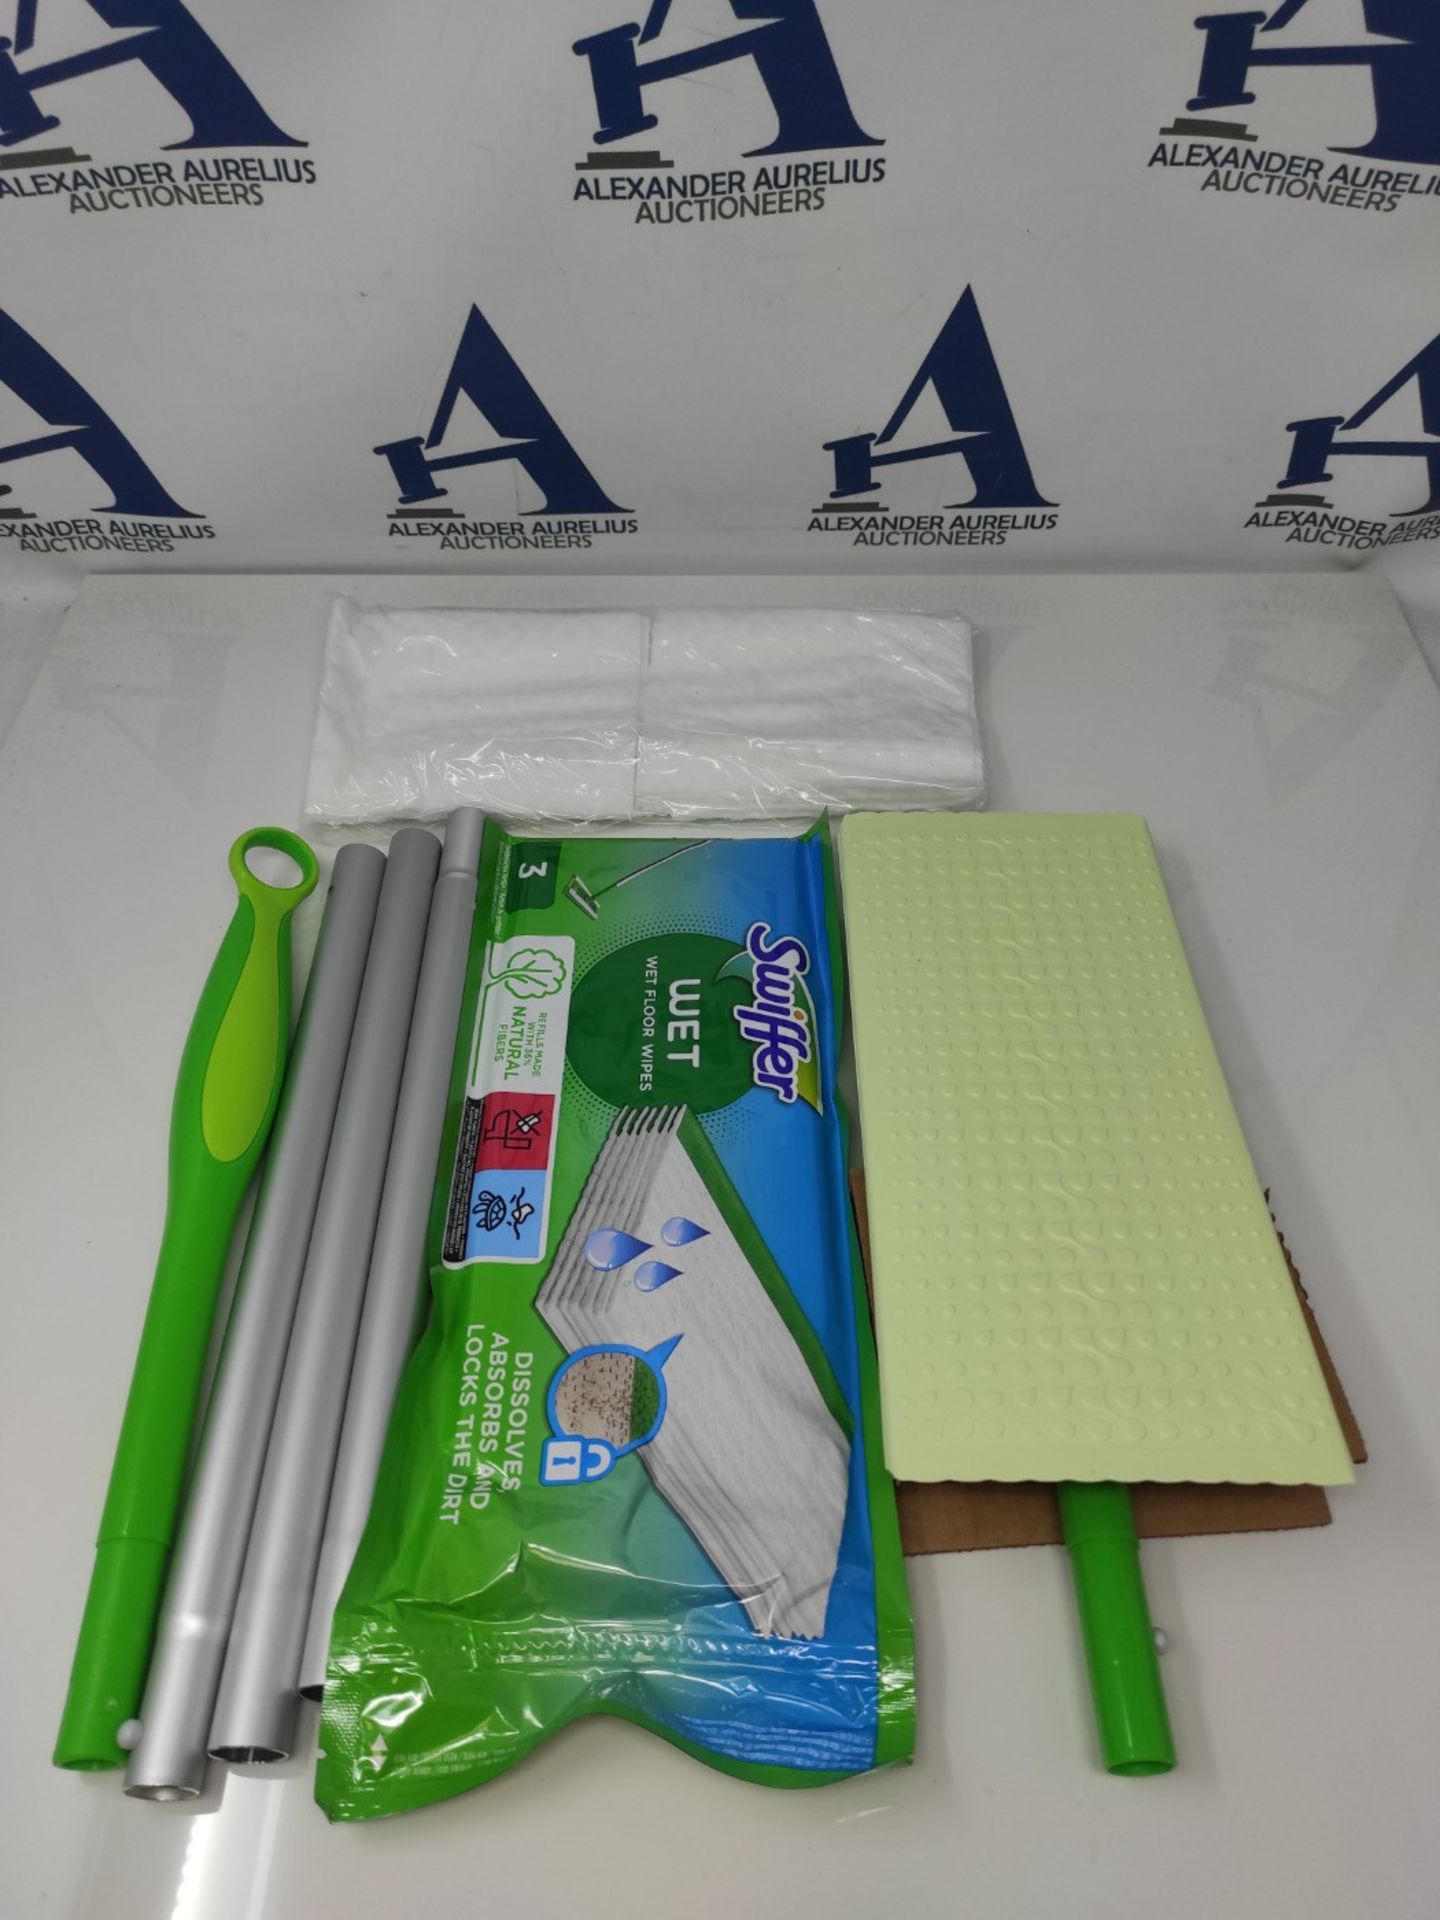 Swiffer Complete Kit Mop, 8 Dry Cloths + 3 Wet Cloths, Traps and Retains 3x More Dust, - Image 3 of 3